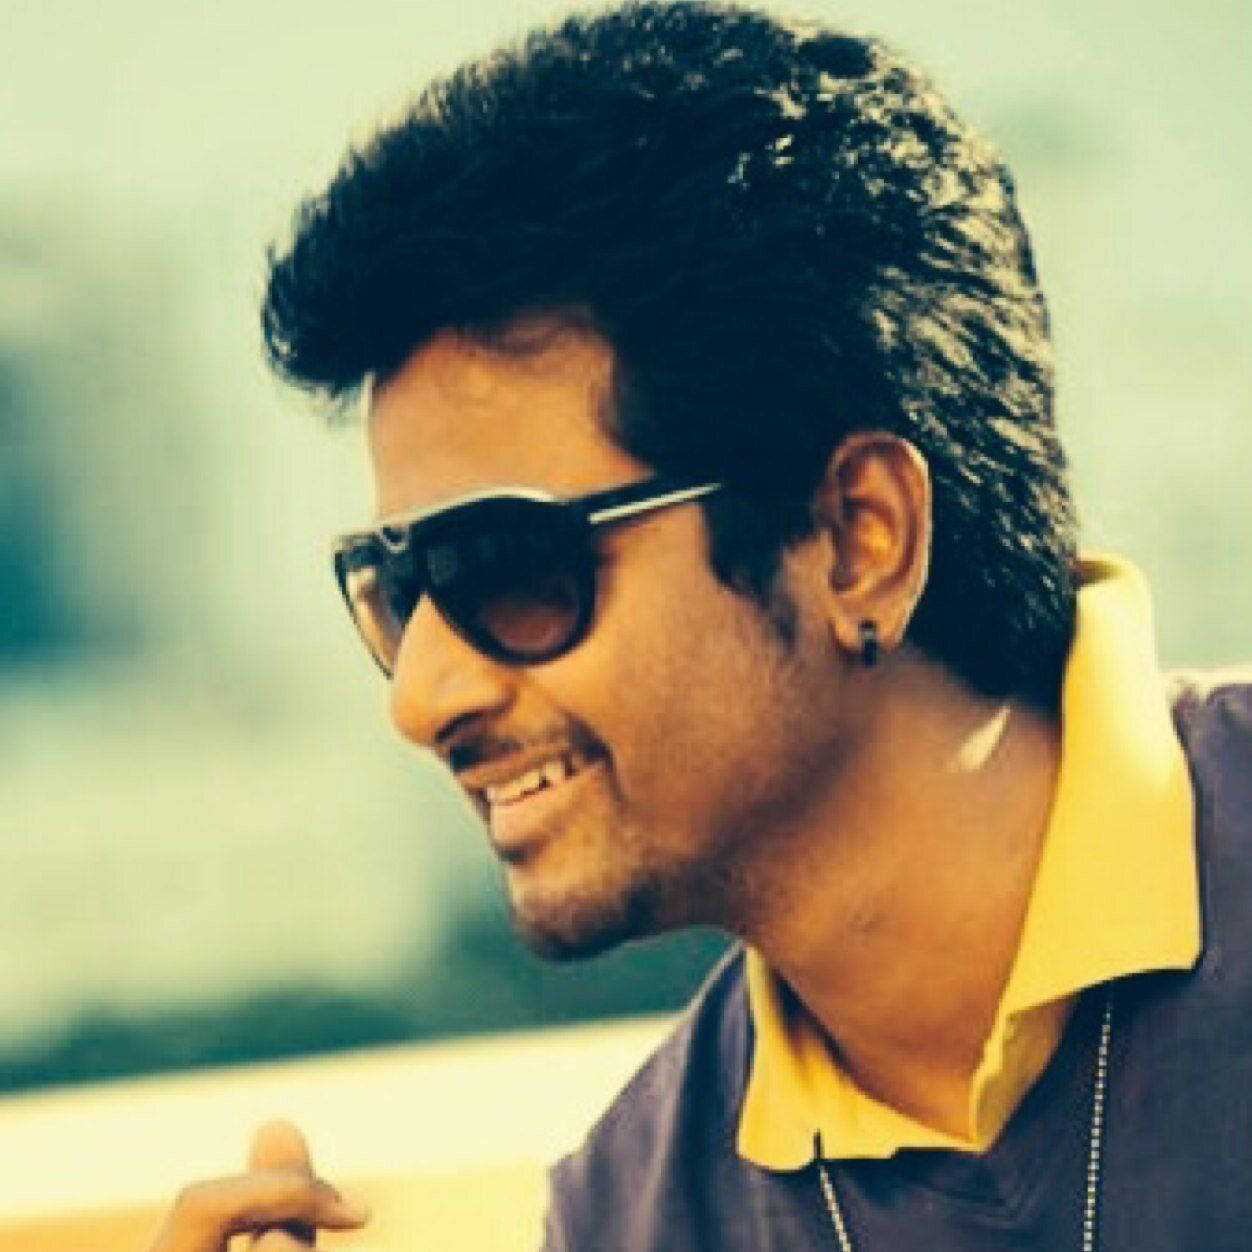 Indian Film Actor Sivakarthikeyan In A Vintage Styled Portrait